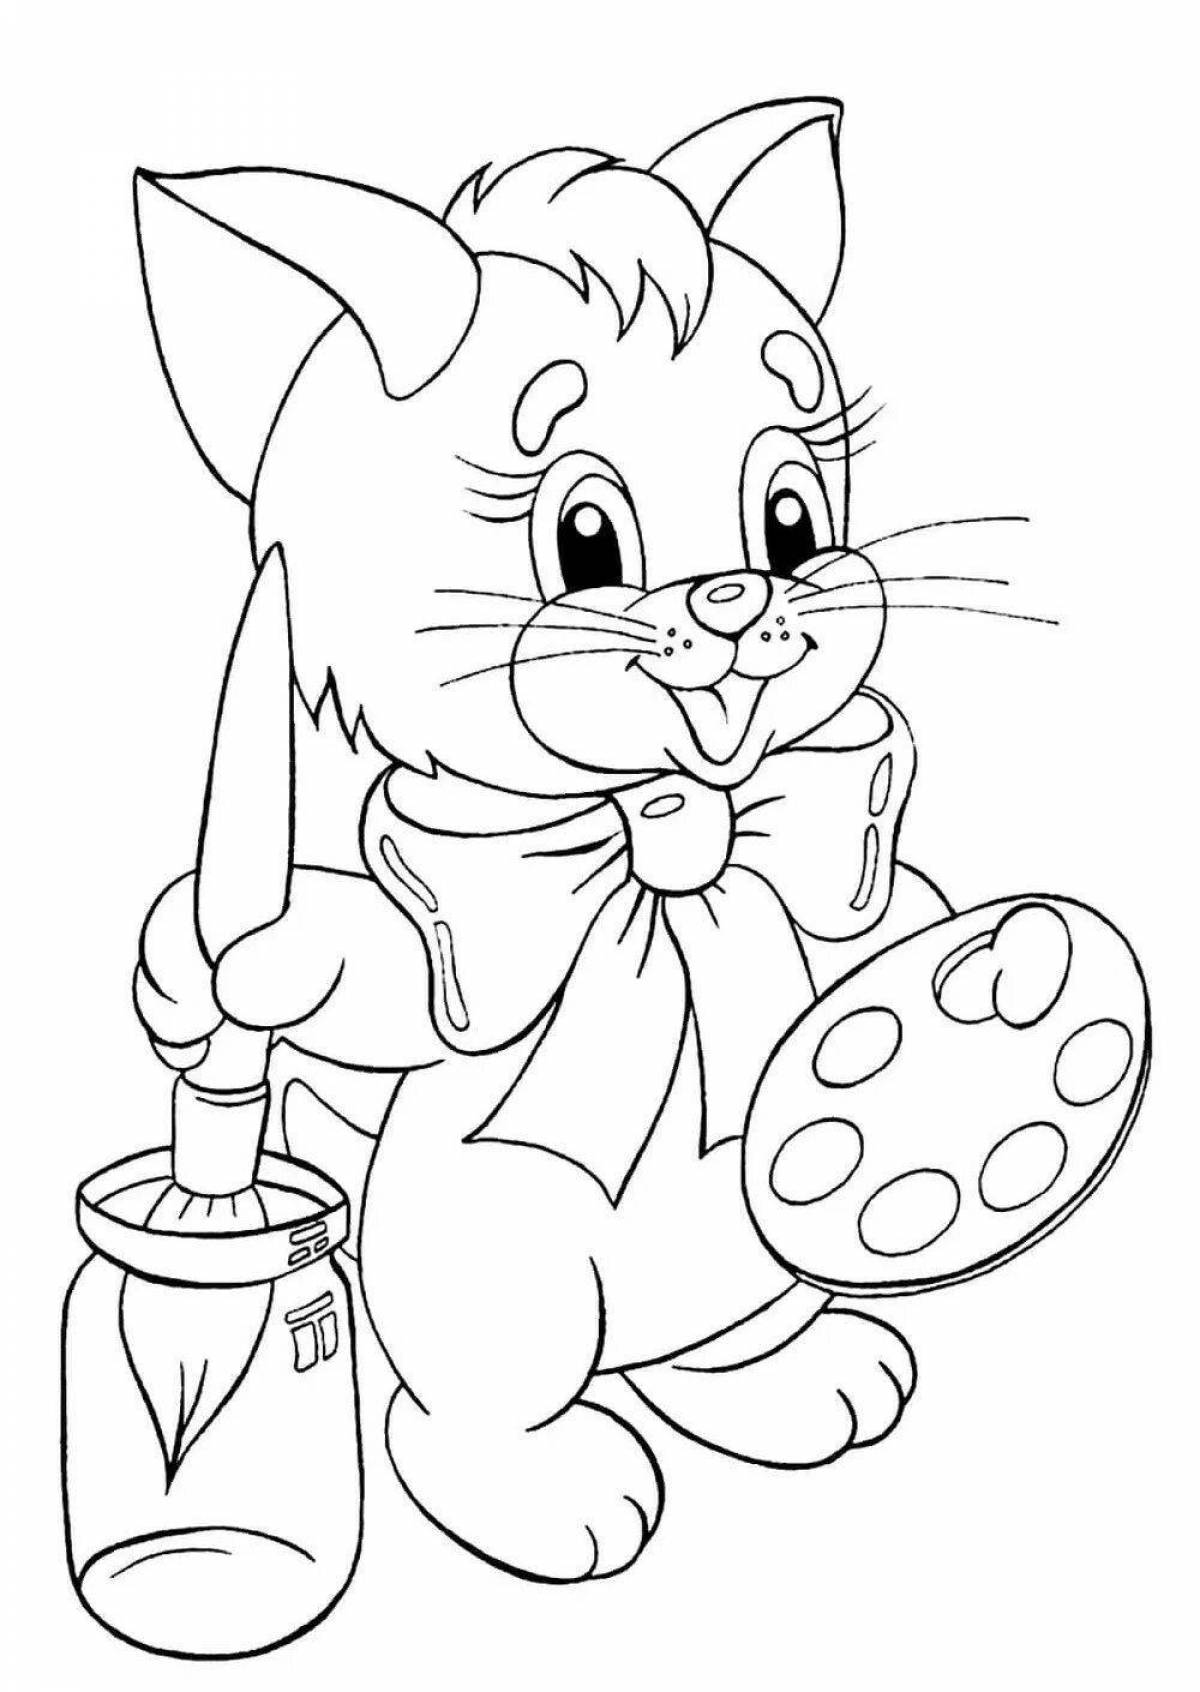 Colorful coloring page loading